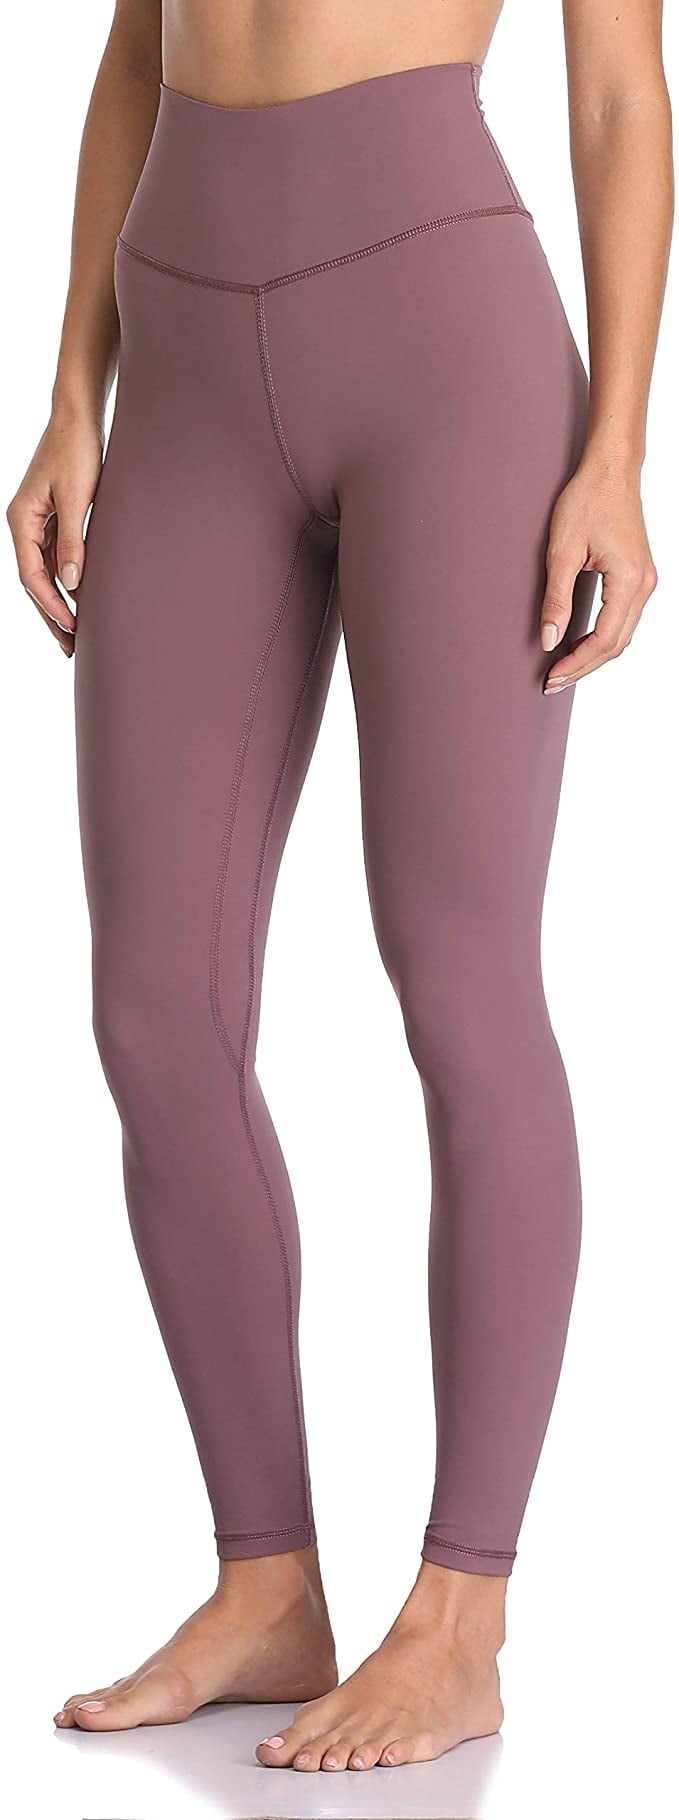 Colorfulkoala Buttery Soft High Waisted Yoga Pants, These 20 Leggings on   Have 5-Star Ratings, So We've Got Some Shopping to Do